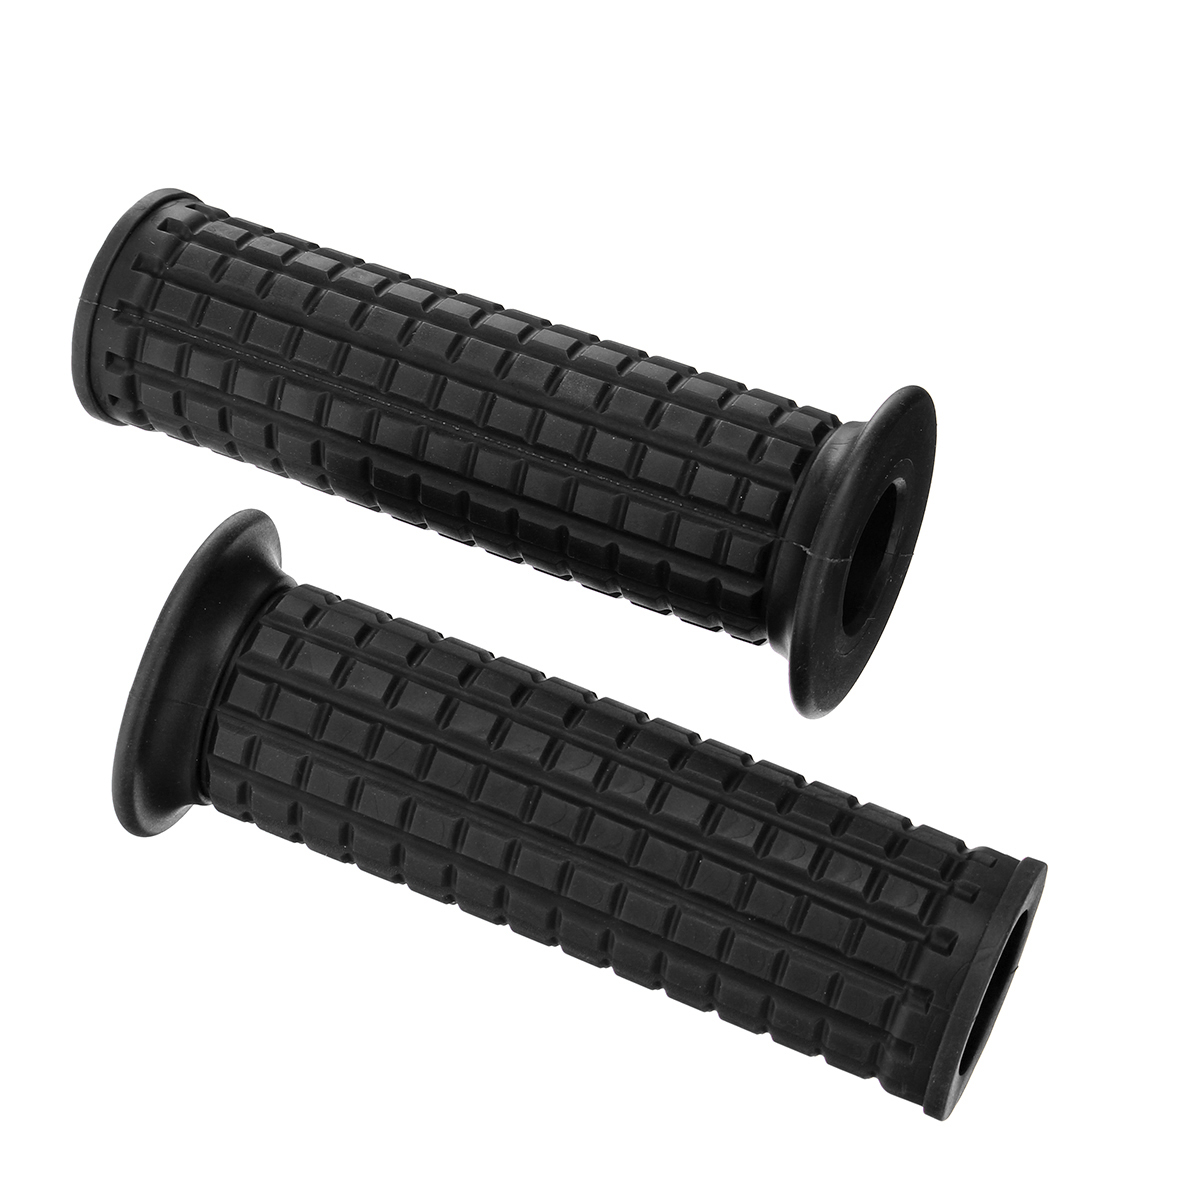 25Mm/28Mm Motorcycle Soft Rubber Handlebar Grip Cover Universal